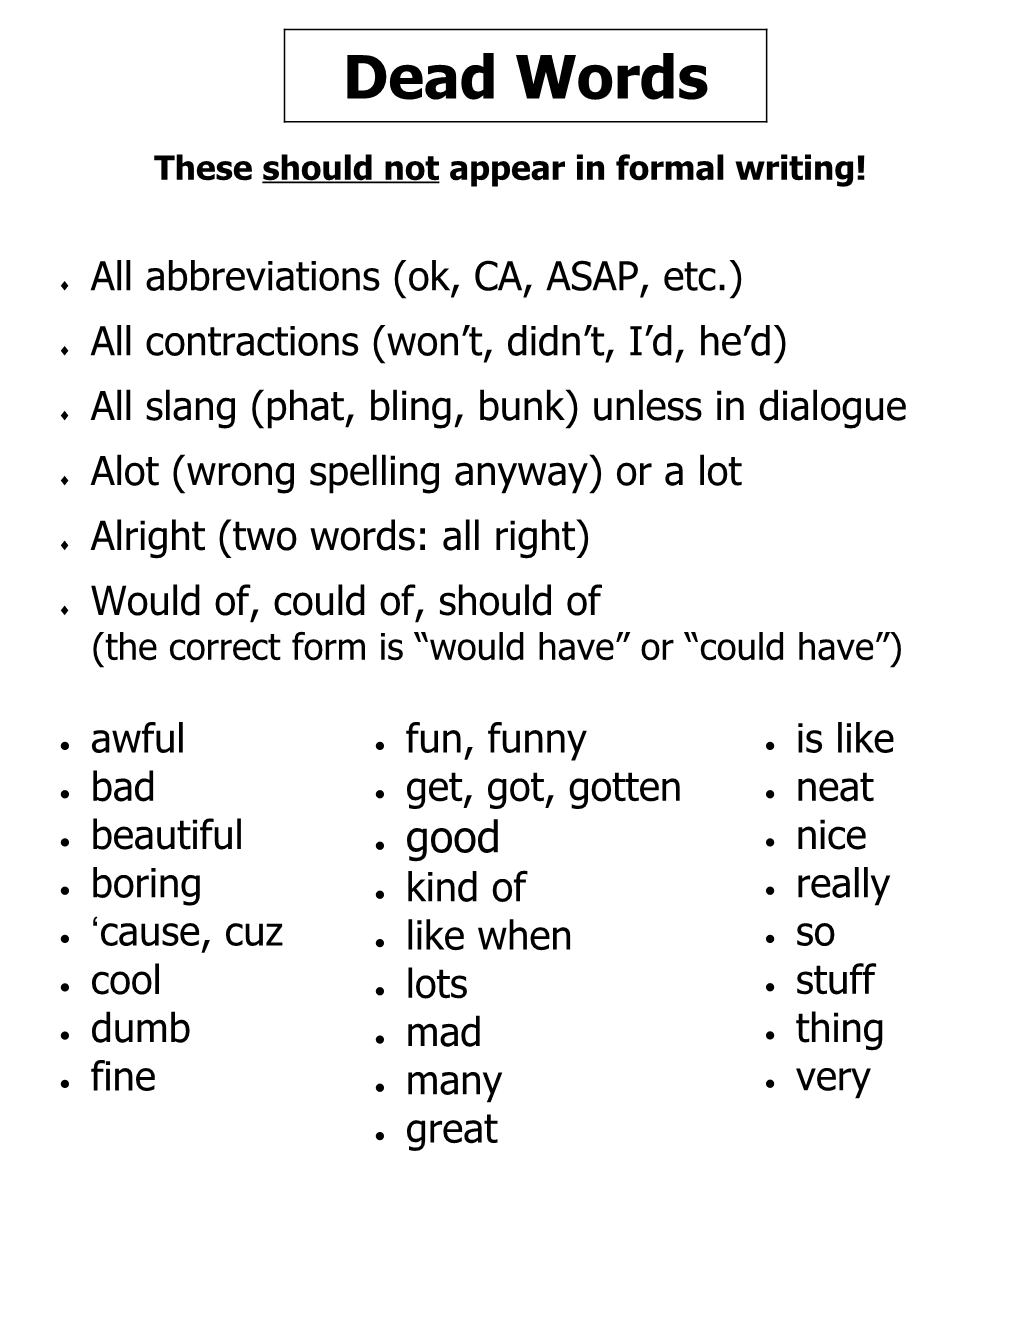 These Should Not Appear in Formal Writing!